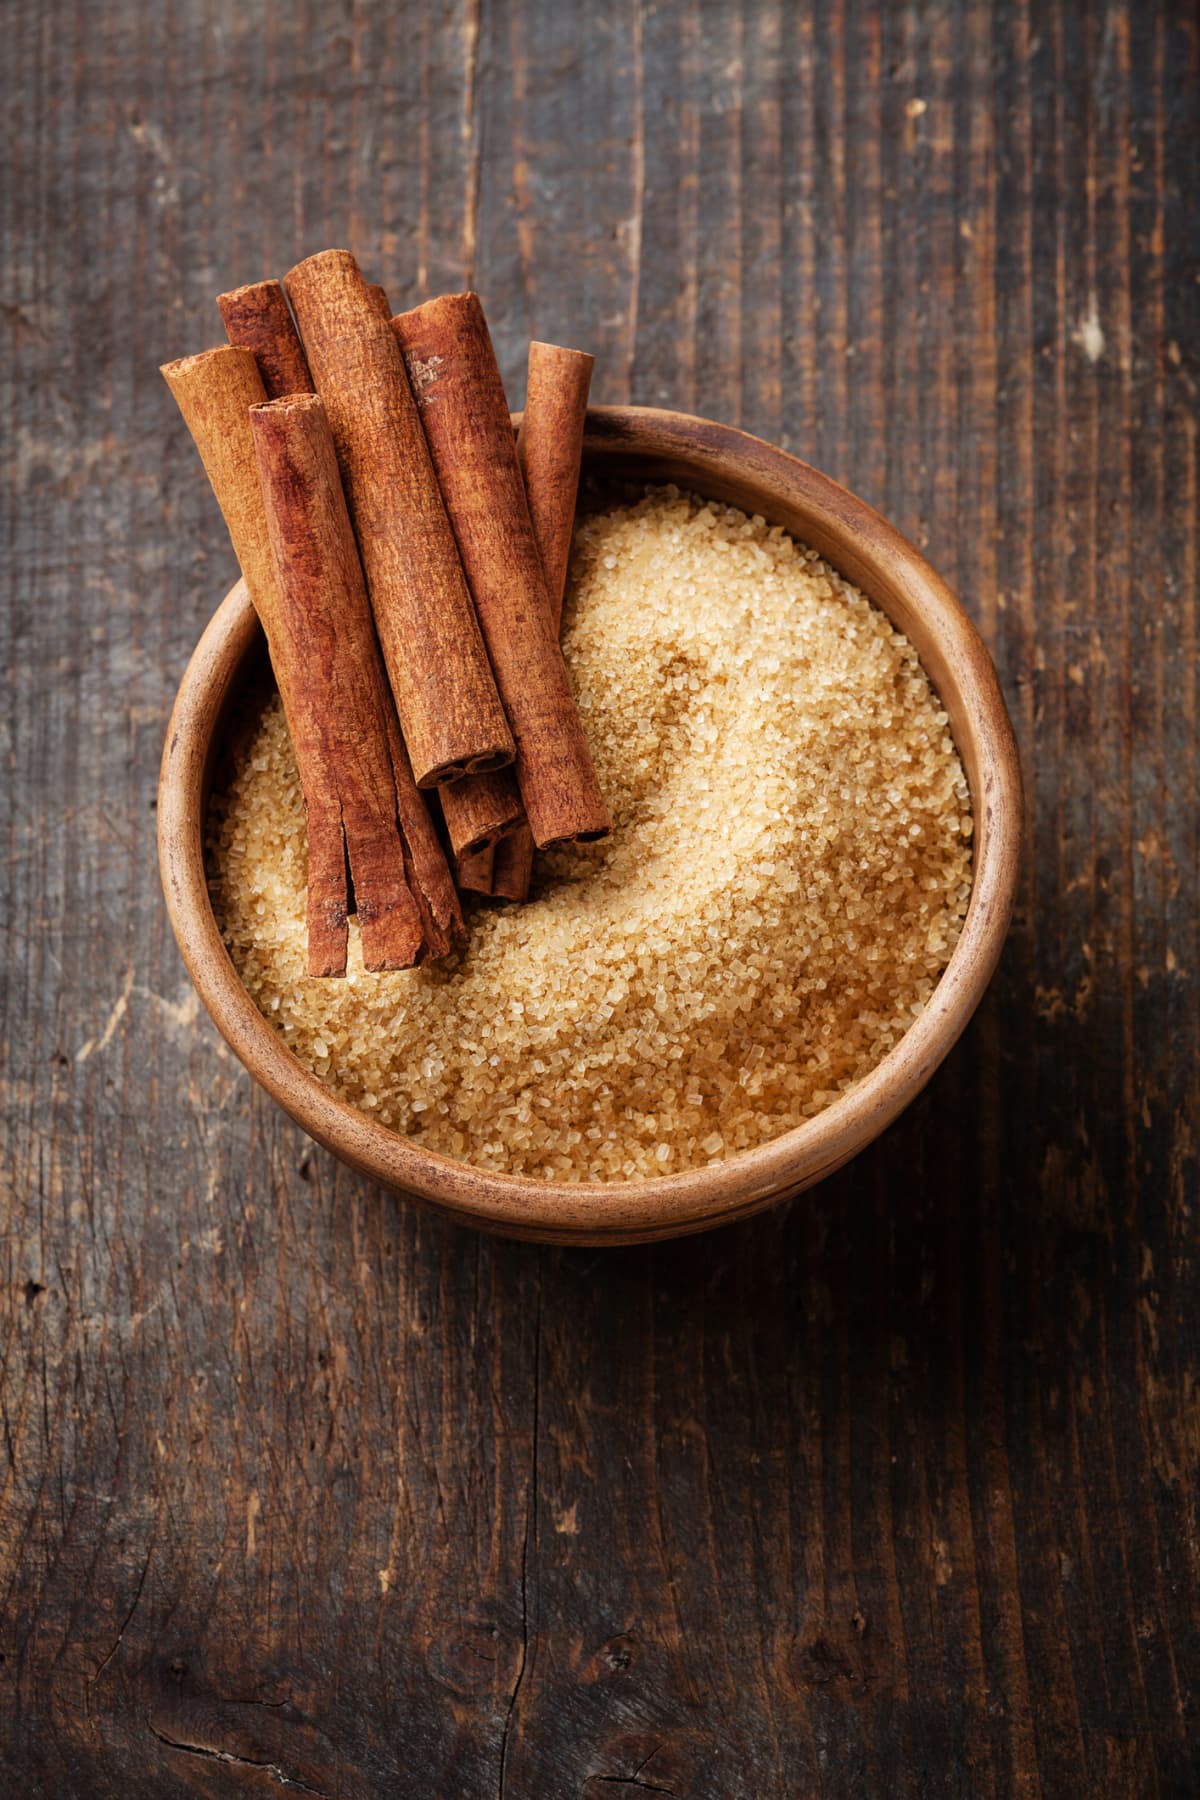 Wooden bowl of sugar with cinnamon sticks on top